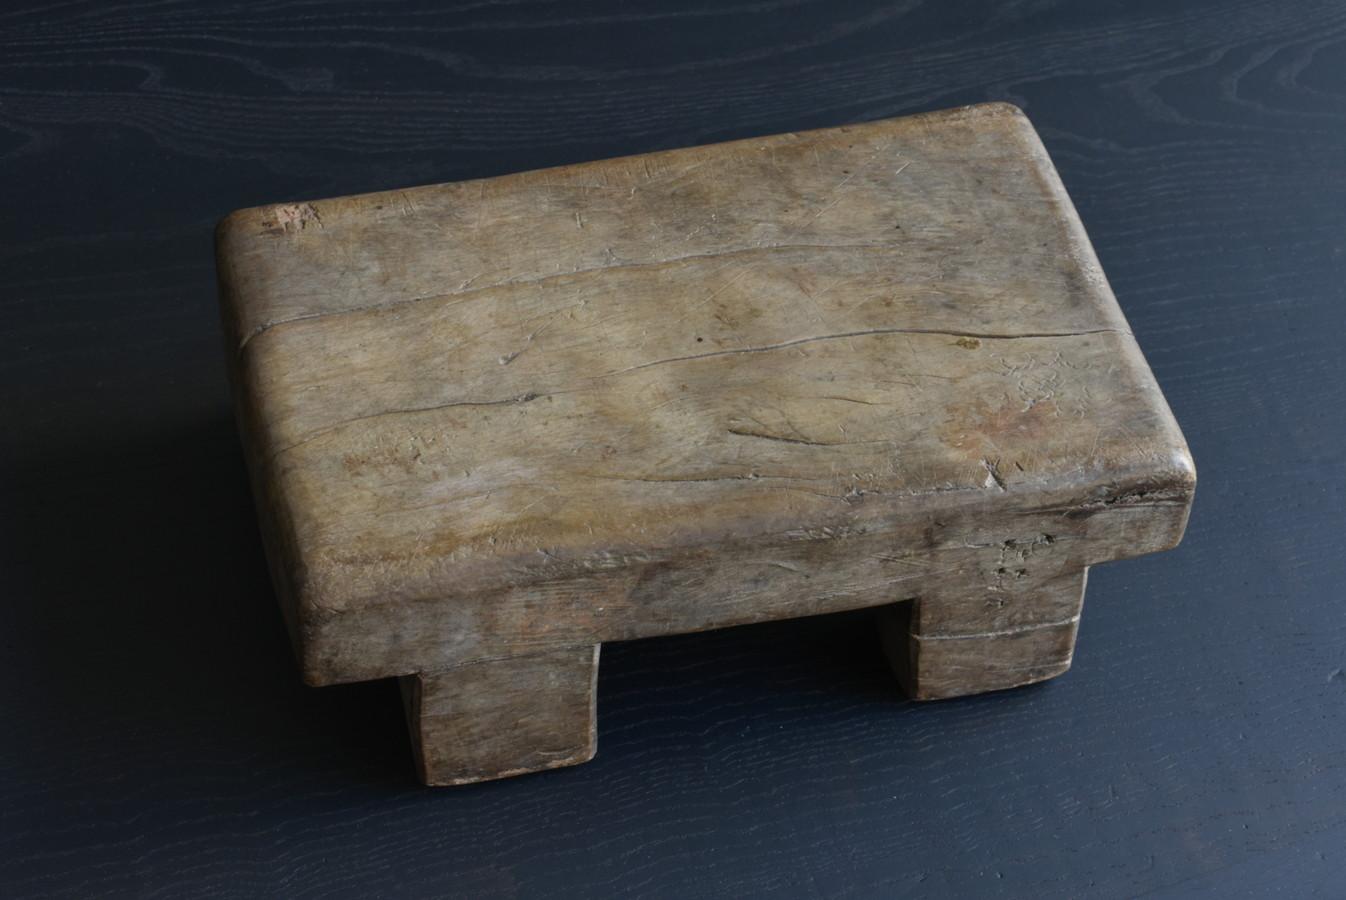 I believe this is made in Indonesia.
Around the 20th century.
It seems that it was used as a workbench because there are fine beating marks and cuts.

The top surface and corners are glossy, and you can see that it has been used for many years.

The